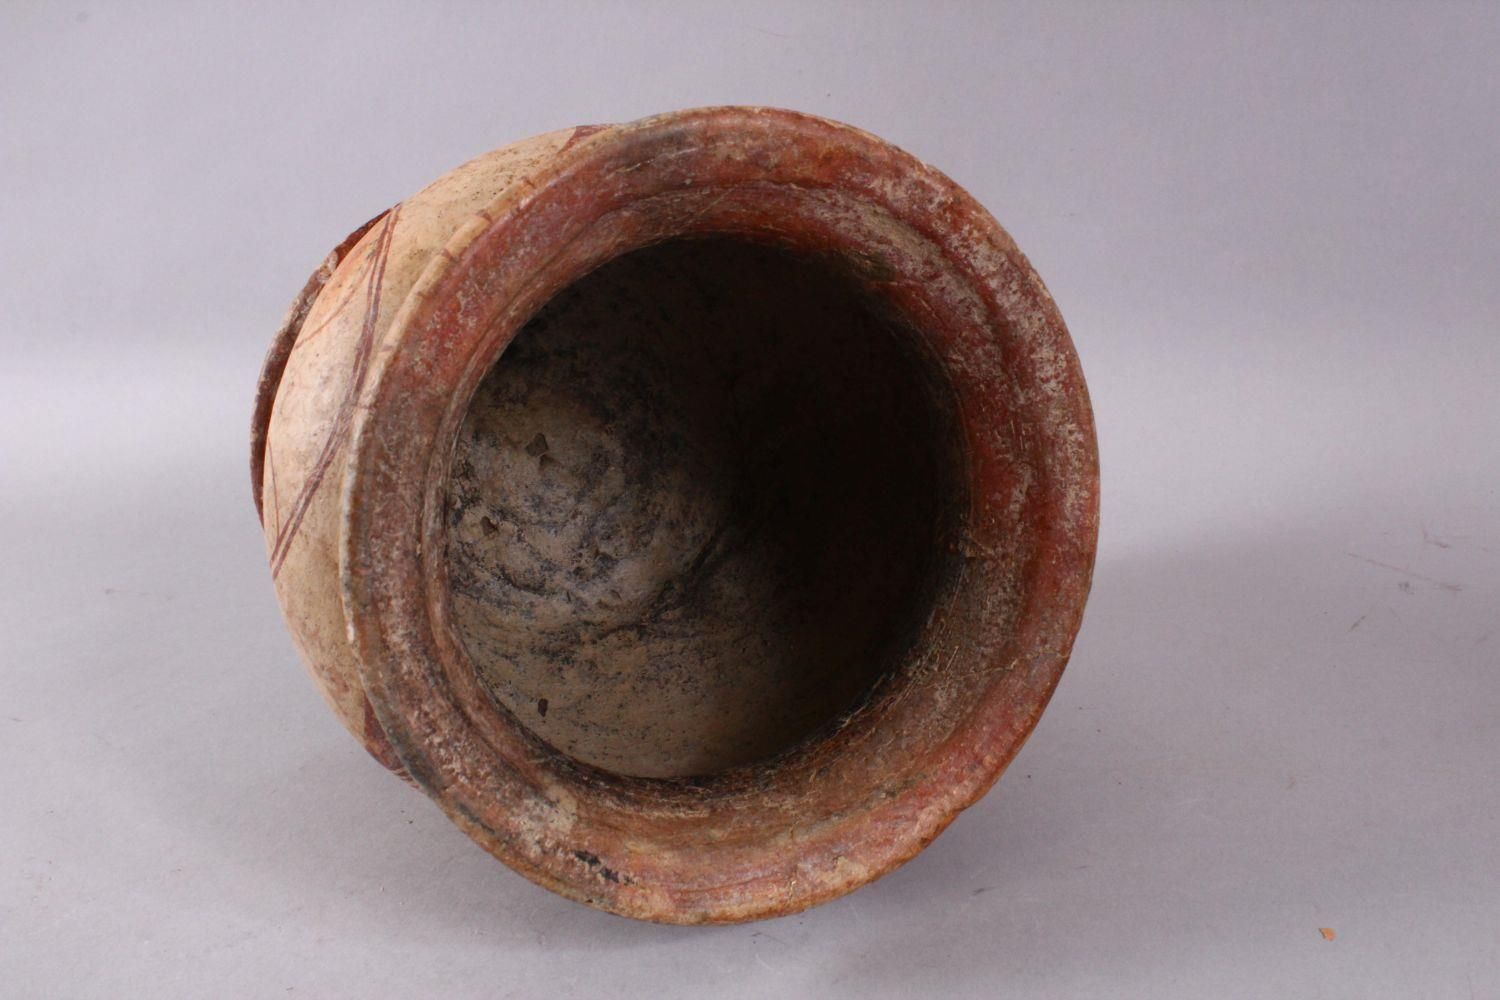 AN EARLY THAI BAN CHIANG POTTERY VASE, with stylized floral motif decoration, 15cm diameter x 16.5cm - Image 6 of 7